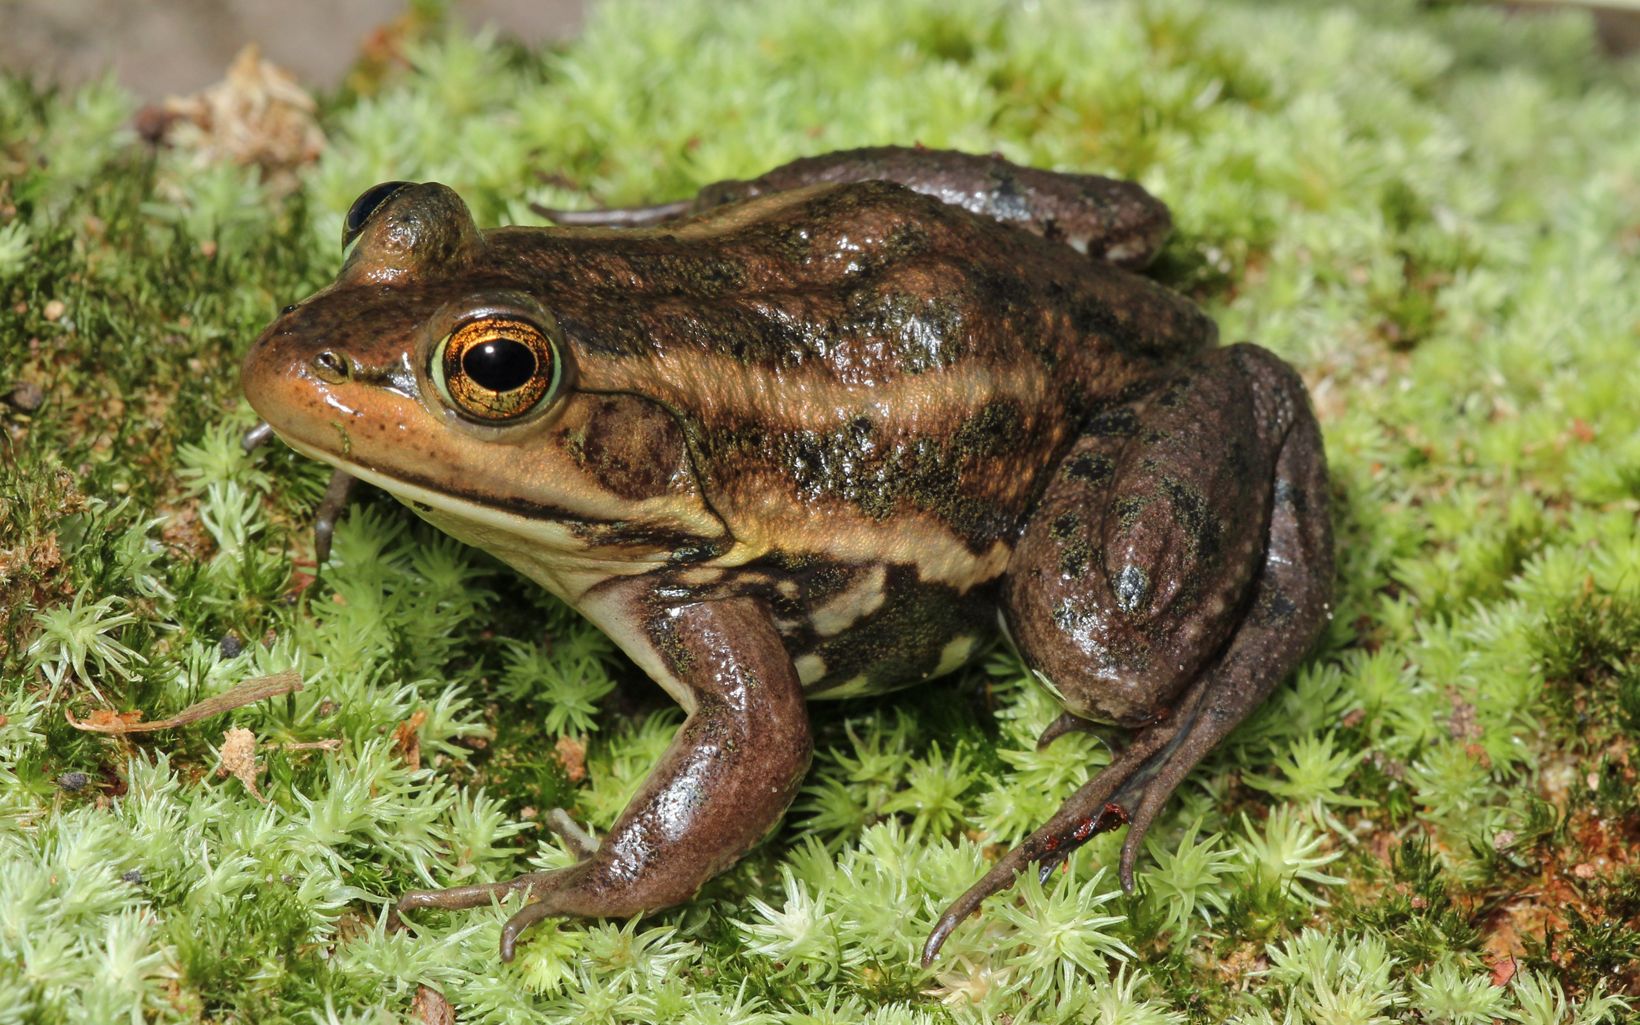 A mottled brown frog sitting on moss.